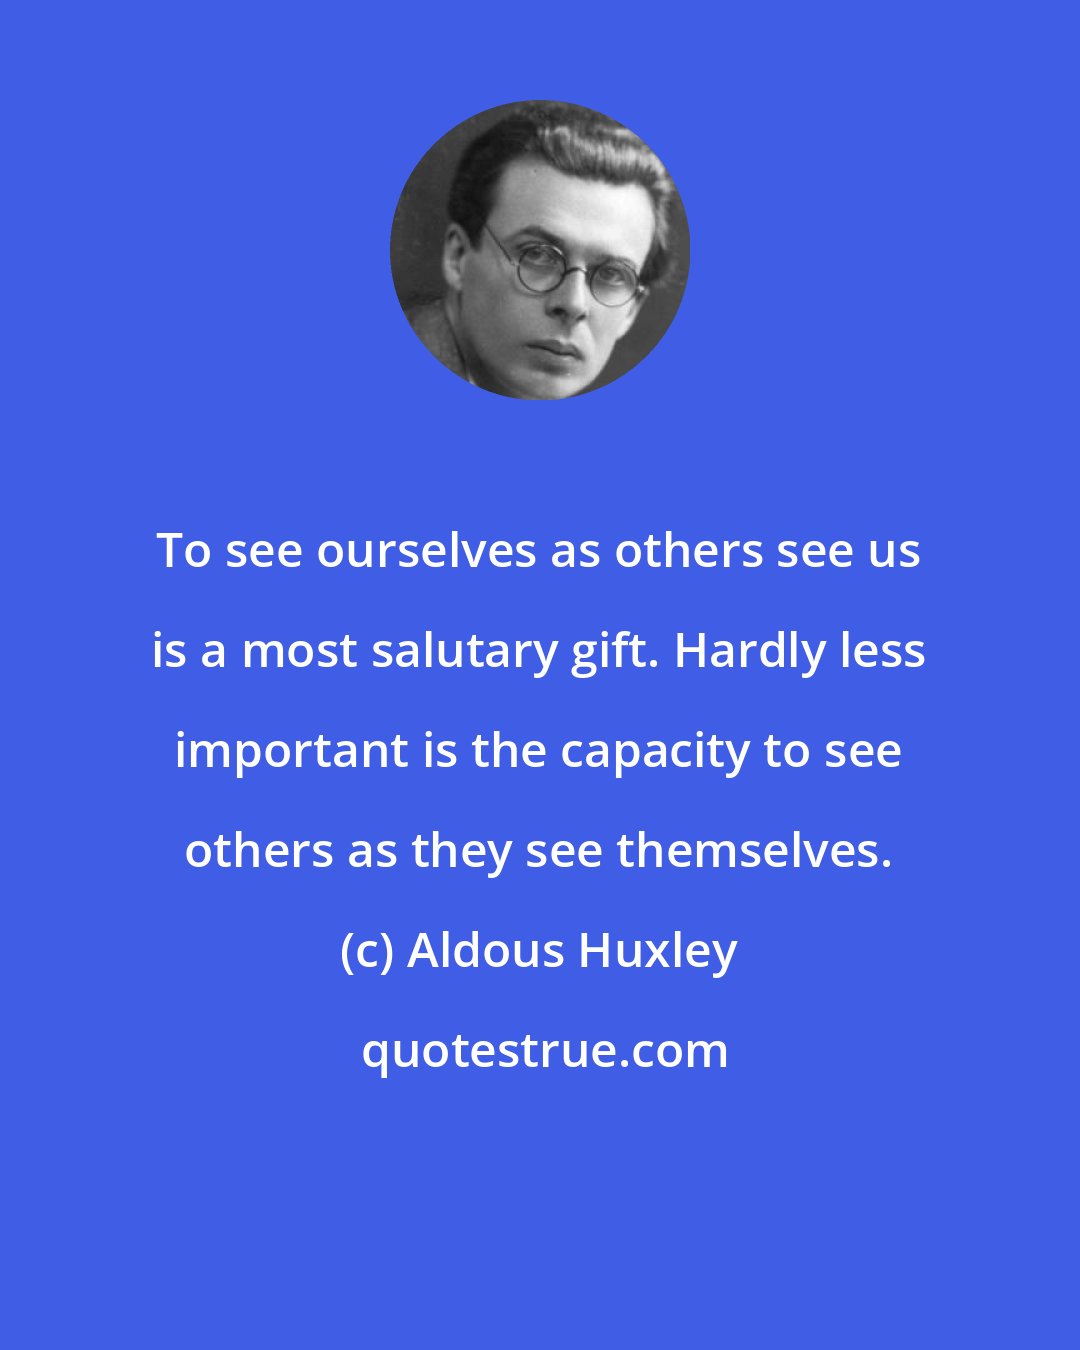 Aldous Huxley: To see ourselves as others see us is a most salutary gift. Hardly less important is the capacity to see others as they see themselves.